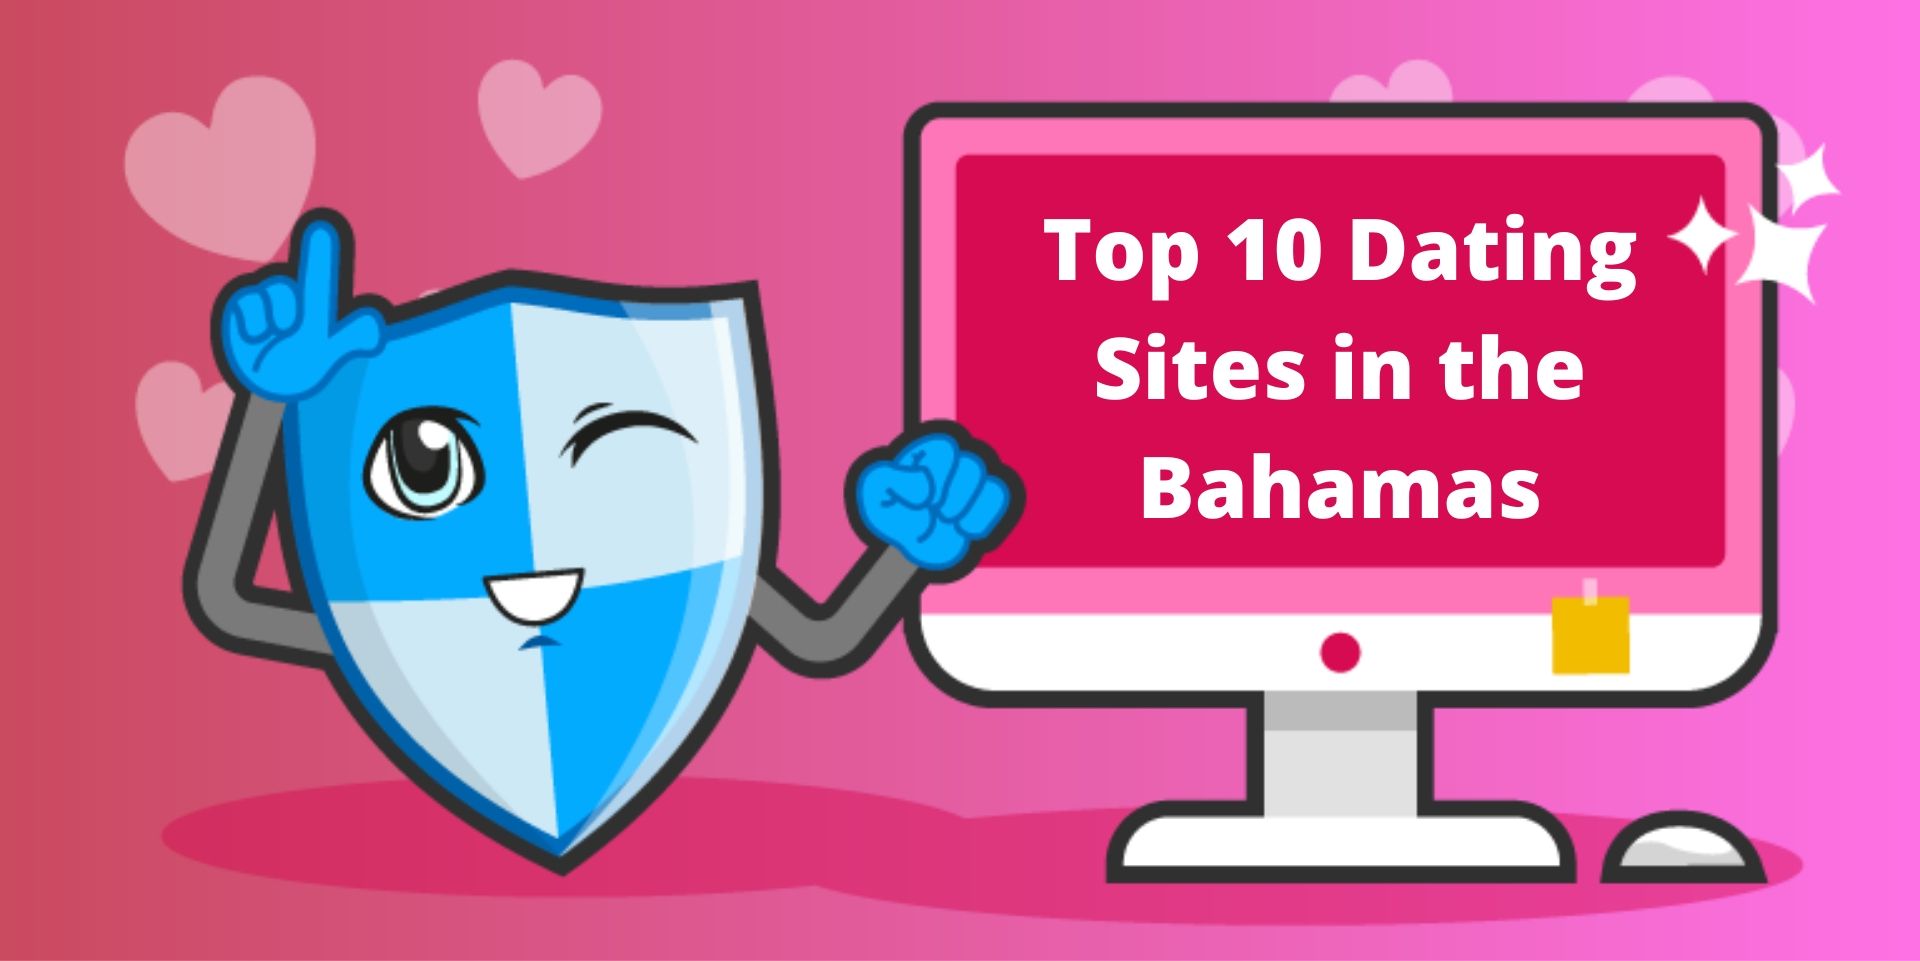 Top 10 Dating Sites in the Bahamas